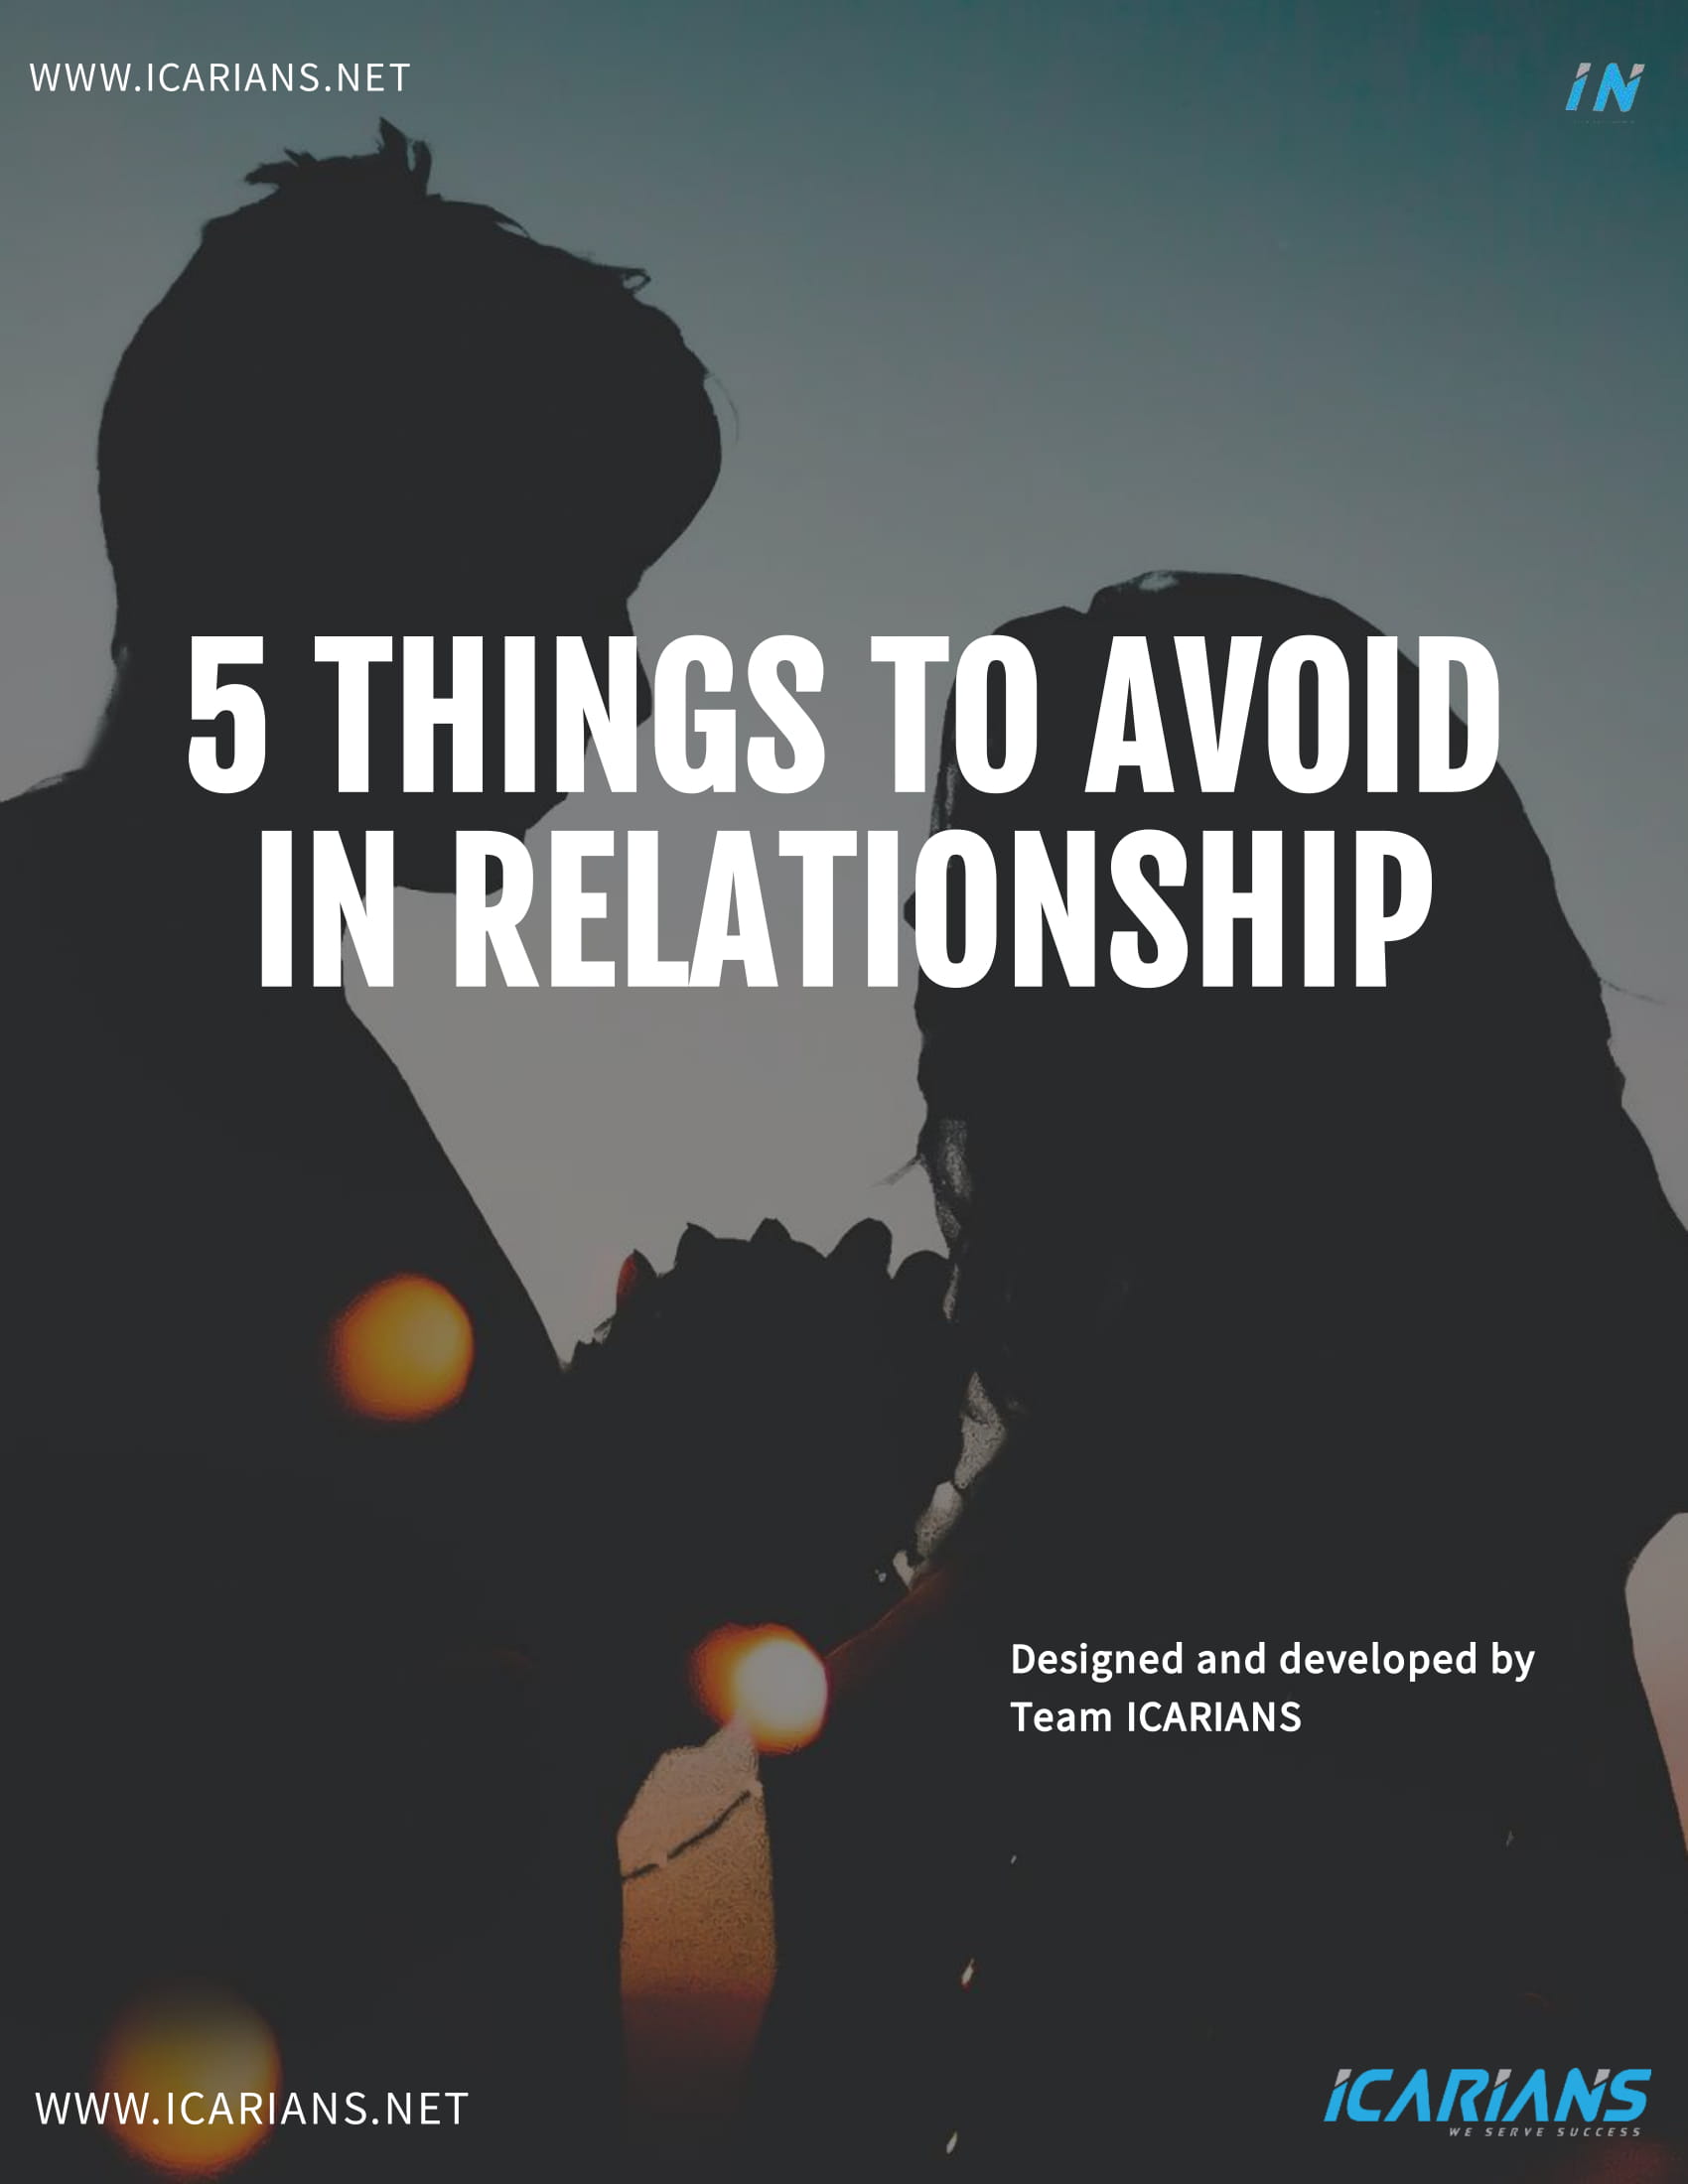 5 THINGS TO AVOID IN RELATIONSHIP